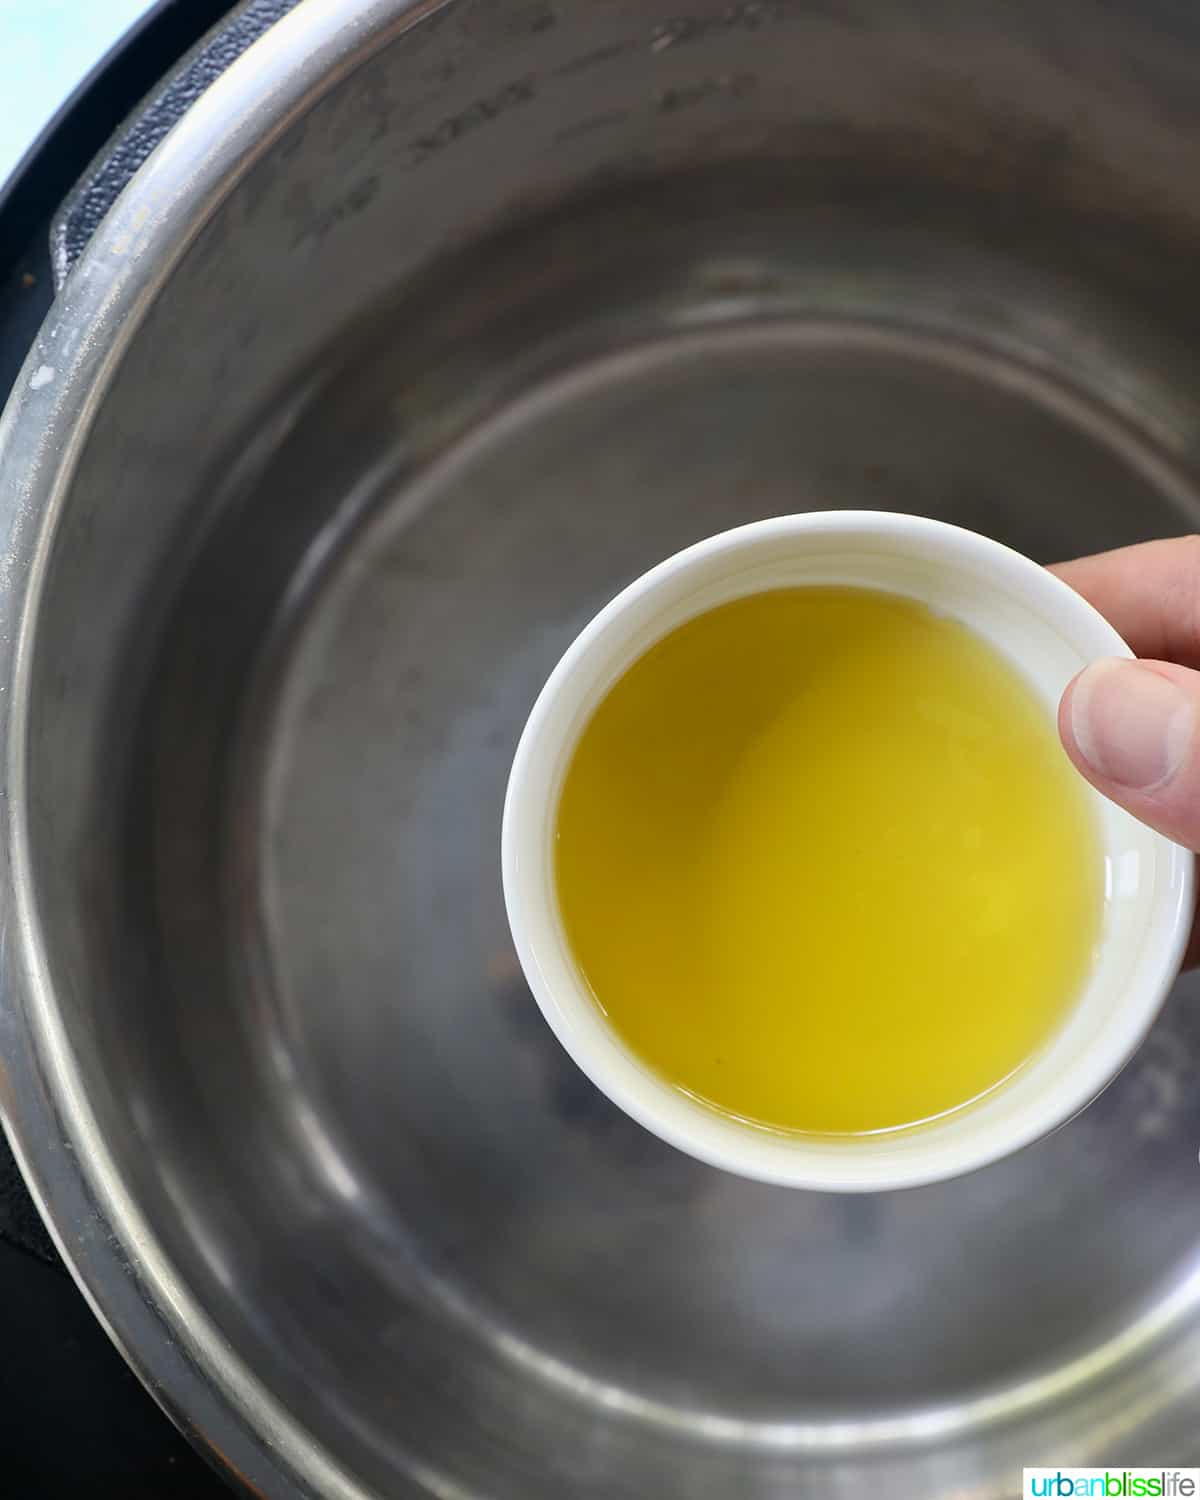 bowl of olive oil above the instant pot.